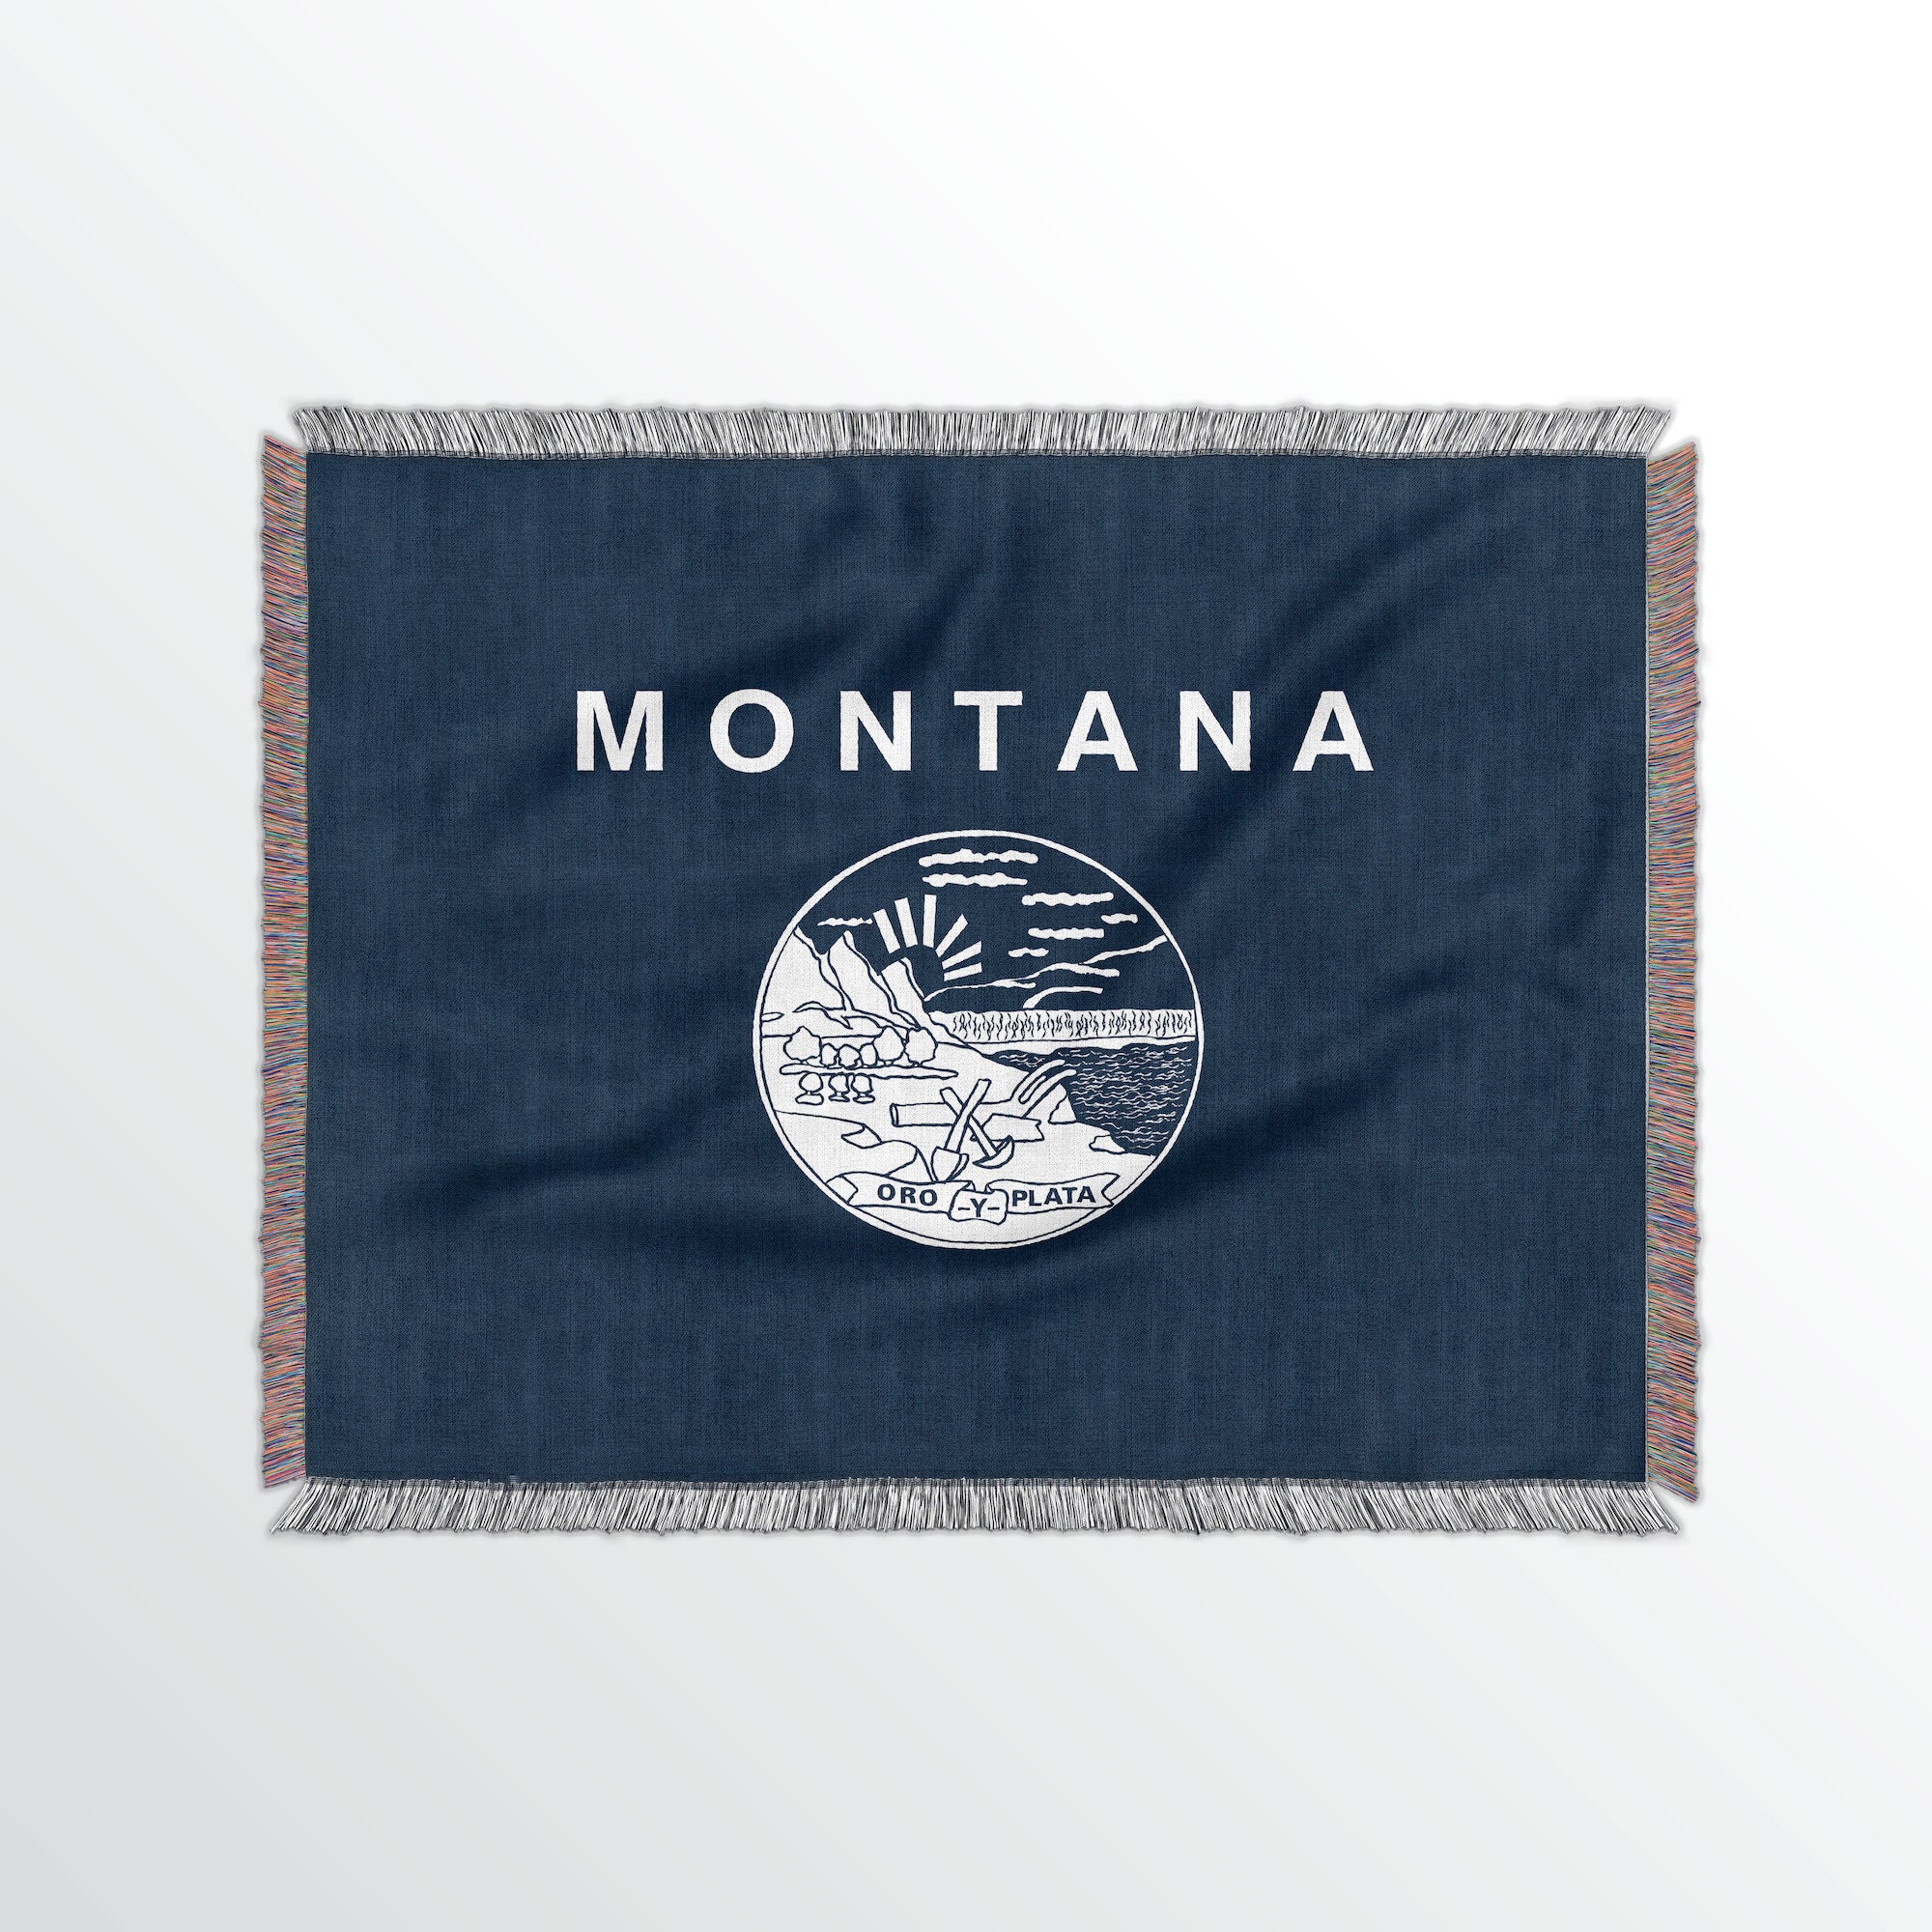 Montana State Woven Cotton Blanet - Point Two Design